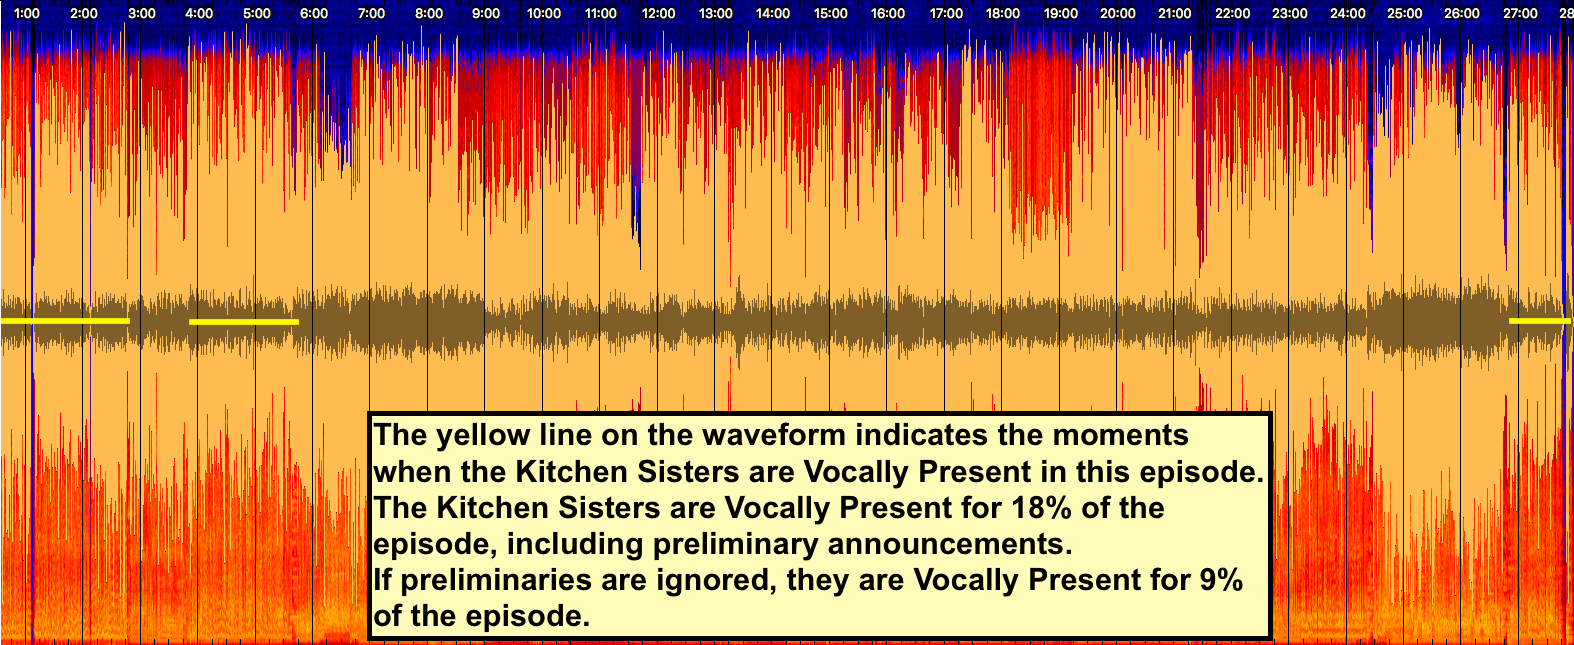 Sonic Visualization of the episode Hidden Kitchens Texas. The visual is a spectrogram of the sound of the episode in yellow and red, layered with a waveform of the audio in brown. Superimposed is a yellow line on the waveform to indicate when the Kitchen Sisters are speaking during the episode. The text reads: The yellow line on the waveform indicates the moments when the Kitchen Sisters are Vocally Present in this episode. The Kitchen Sisters are Vocally Present for 18% of the episode, including preliminary announcements. If preliminaries are ignored, they are Vocally Present for 9% of the episode.